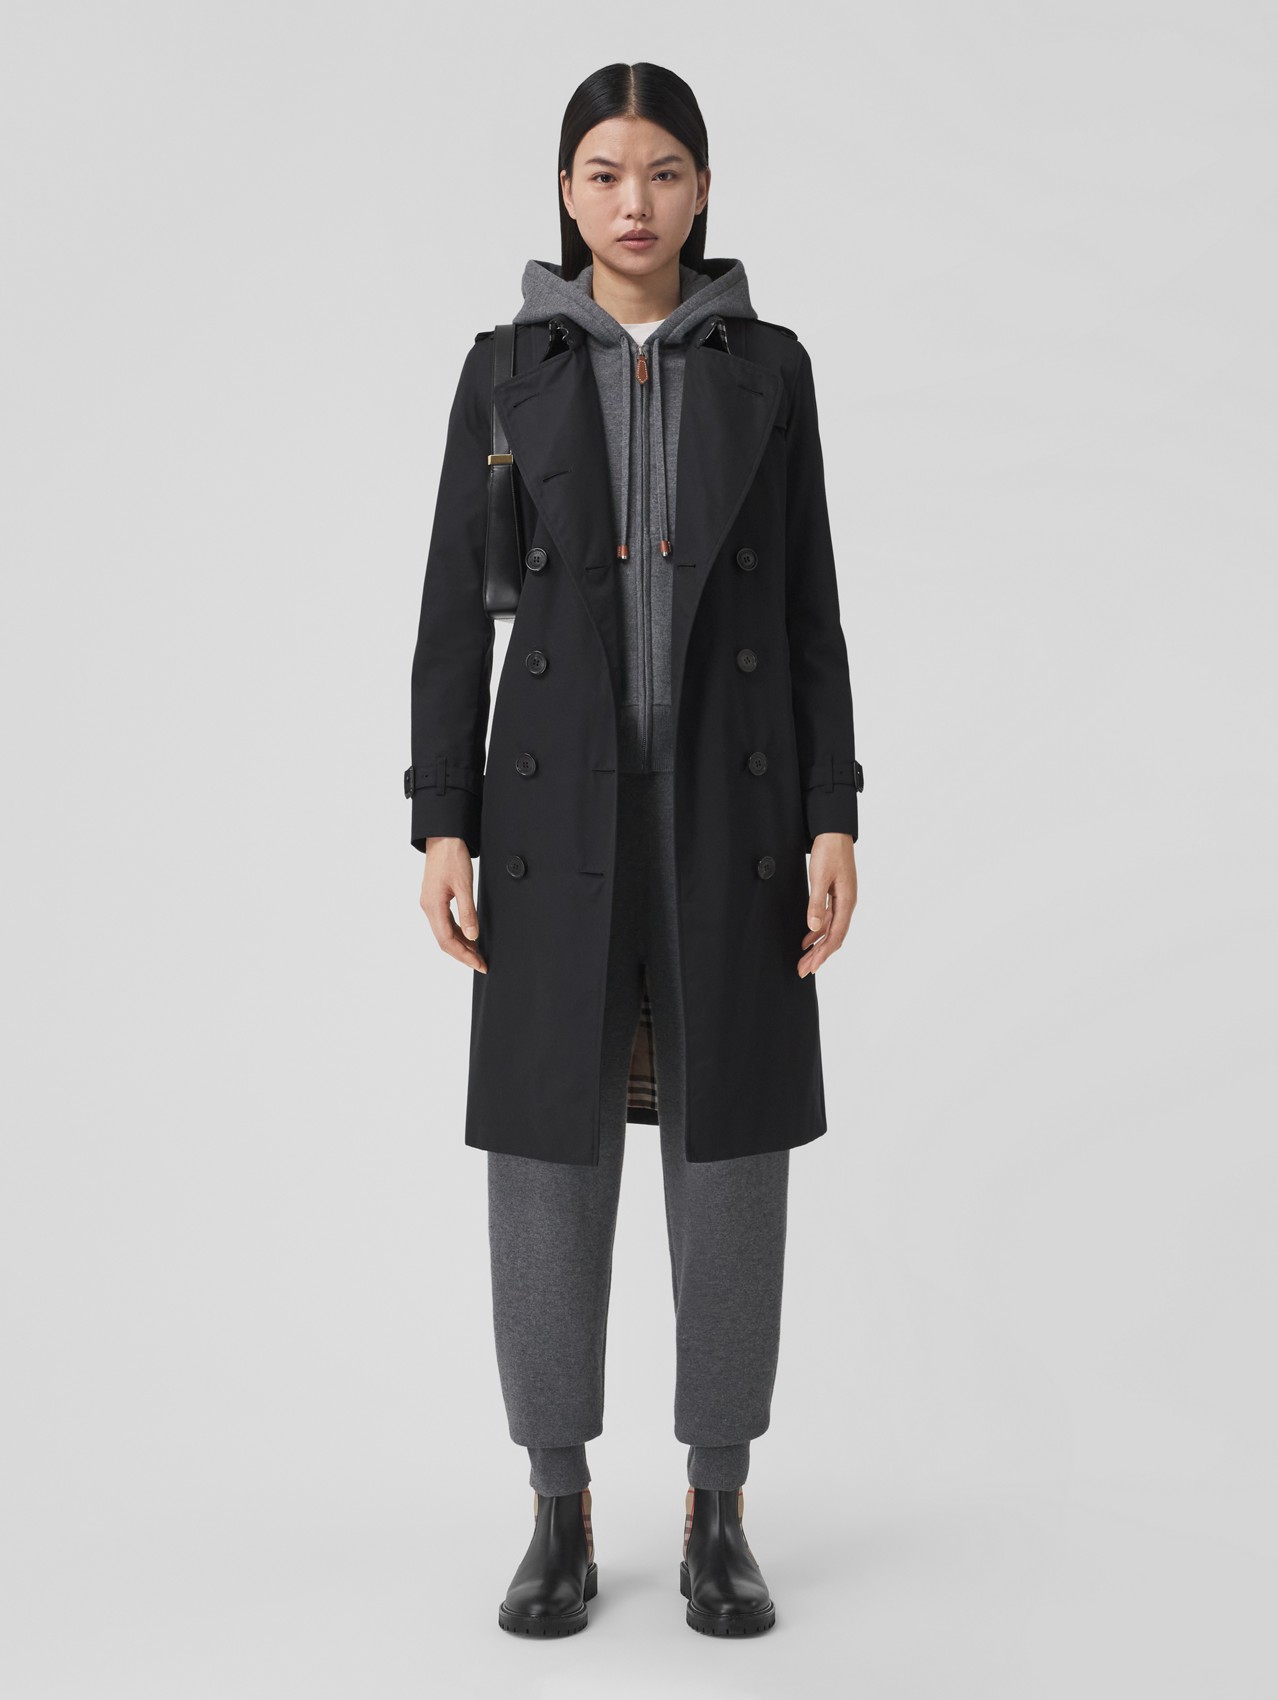 The Long Kensington Heritage Trench Coat in Midnight